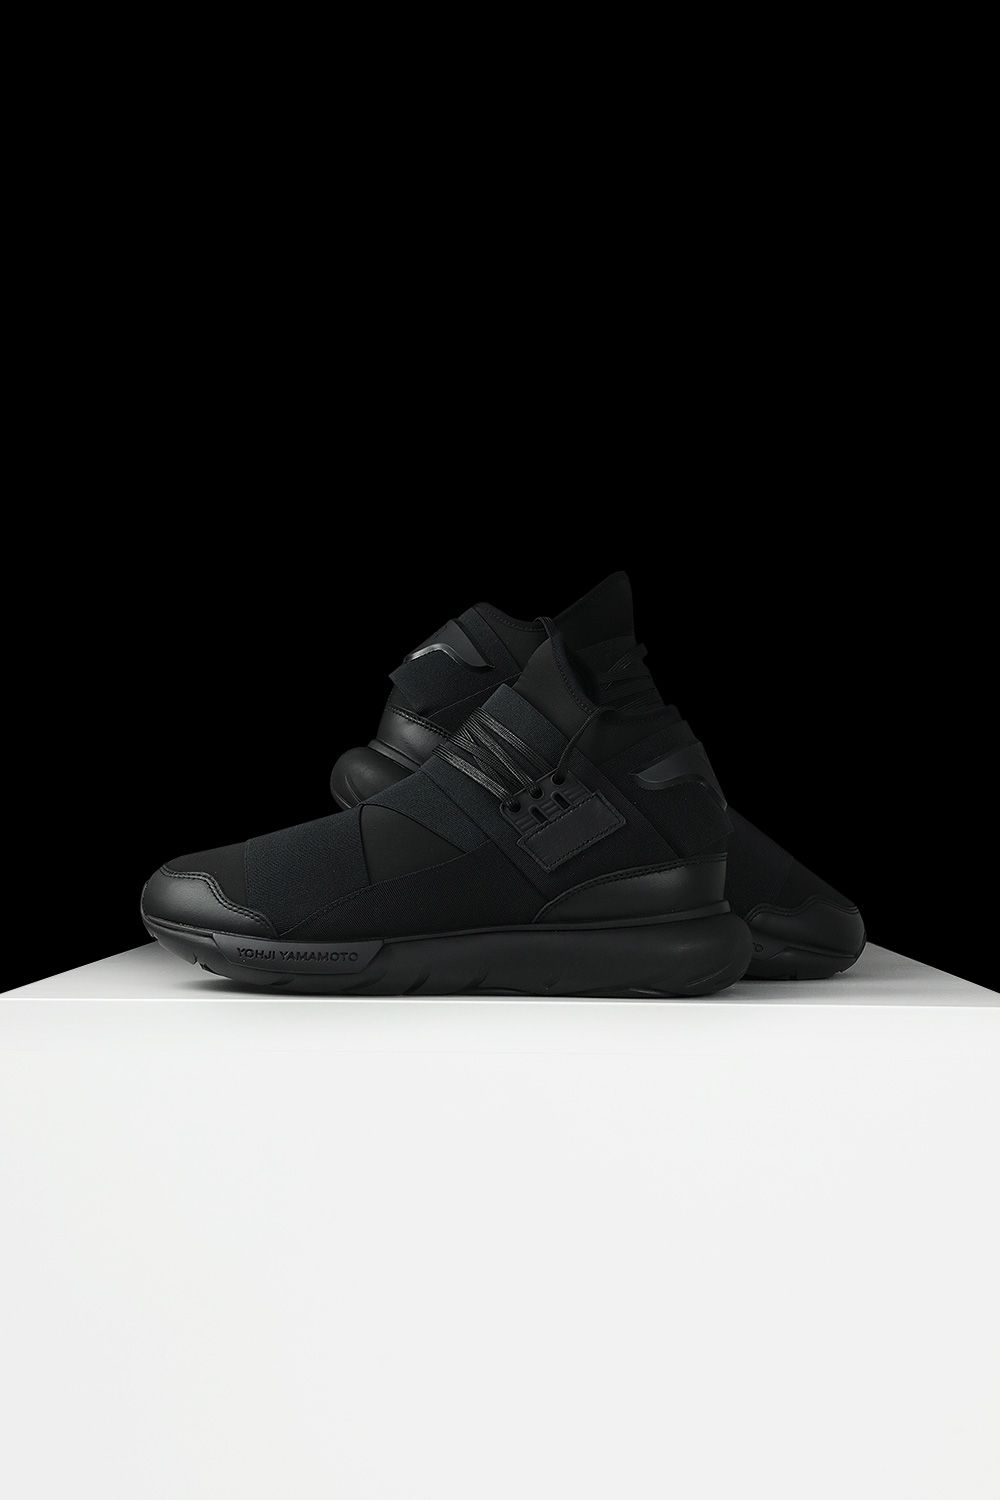 Y-3 / ワイスリー】23SS LAST DELIVERY - 史上最高傑作